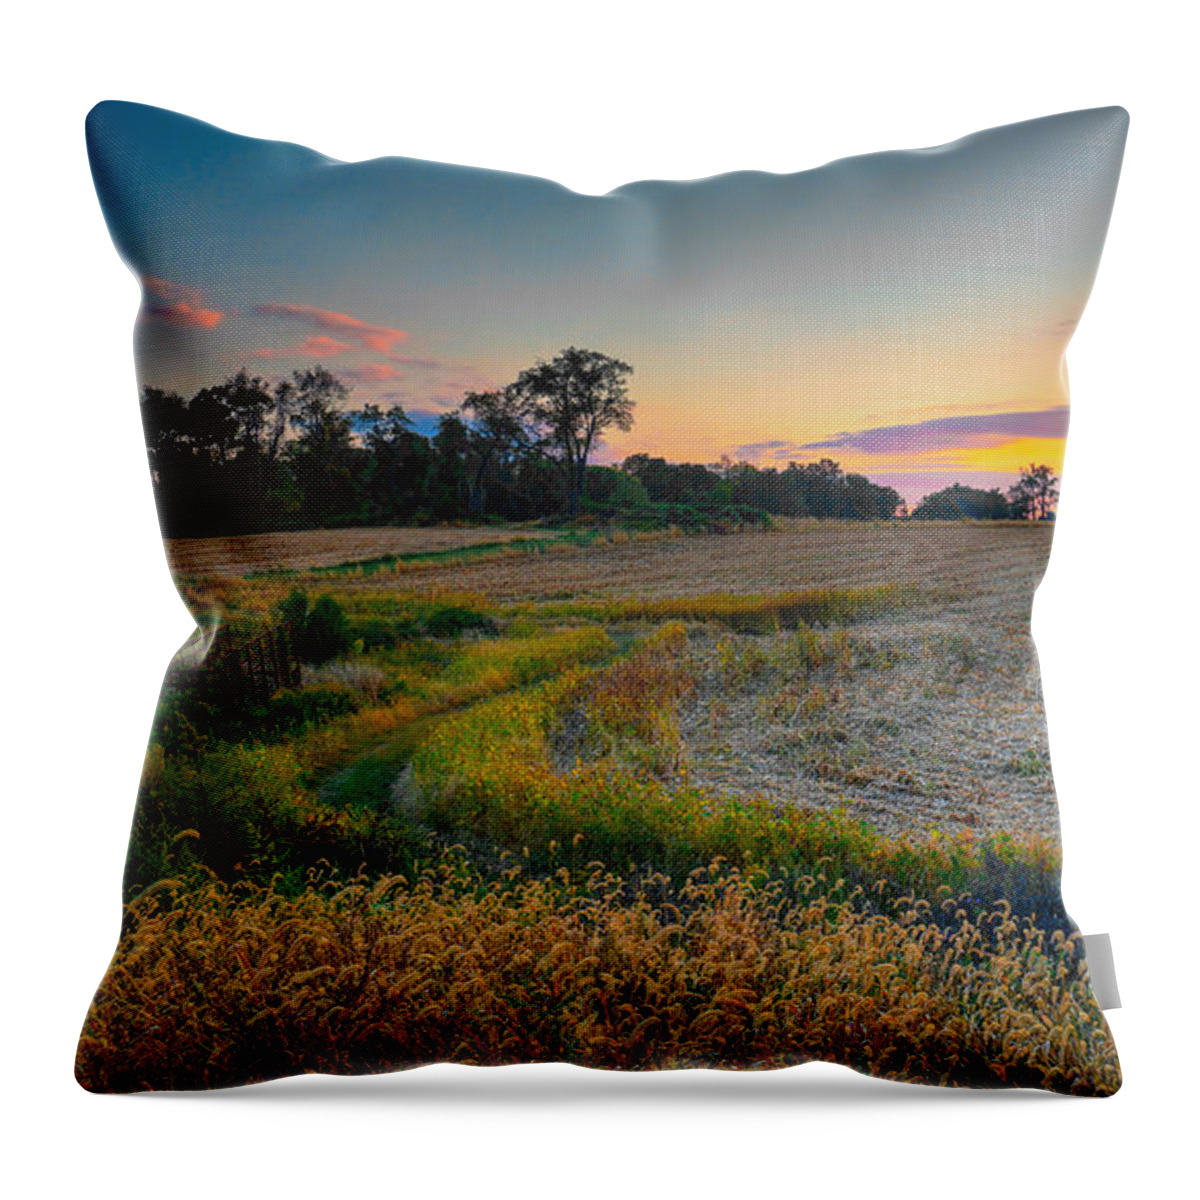 Sunset Throw Pillow featuring the photograph October Evening on the Farm by William Jobes